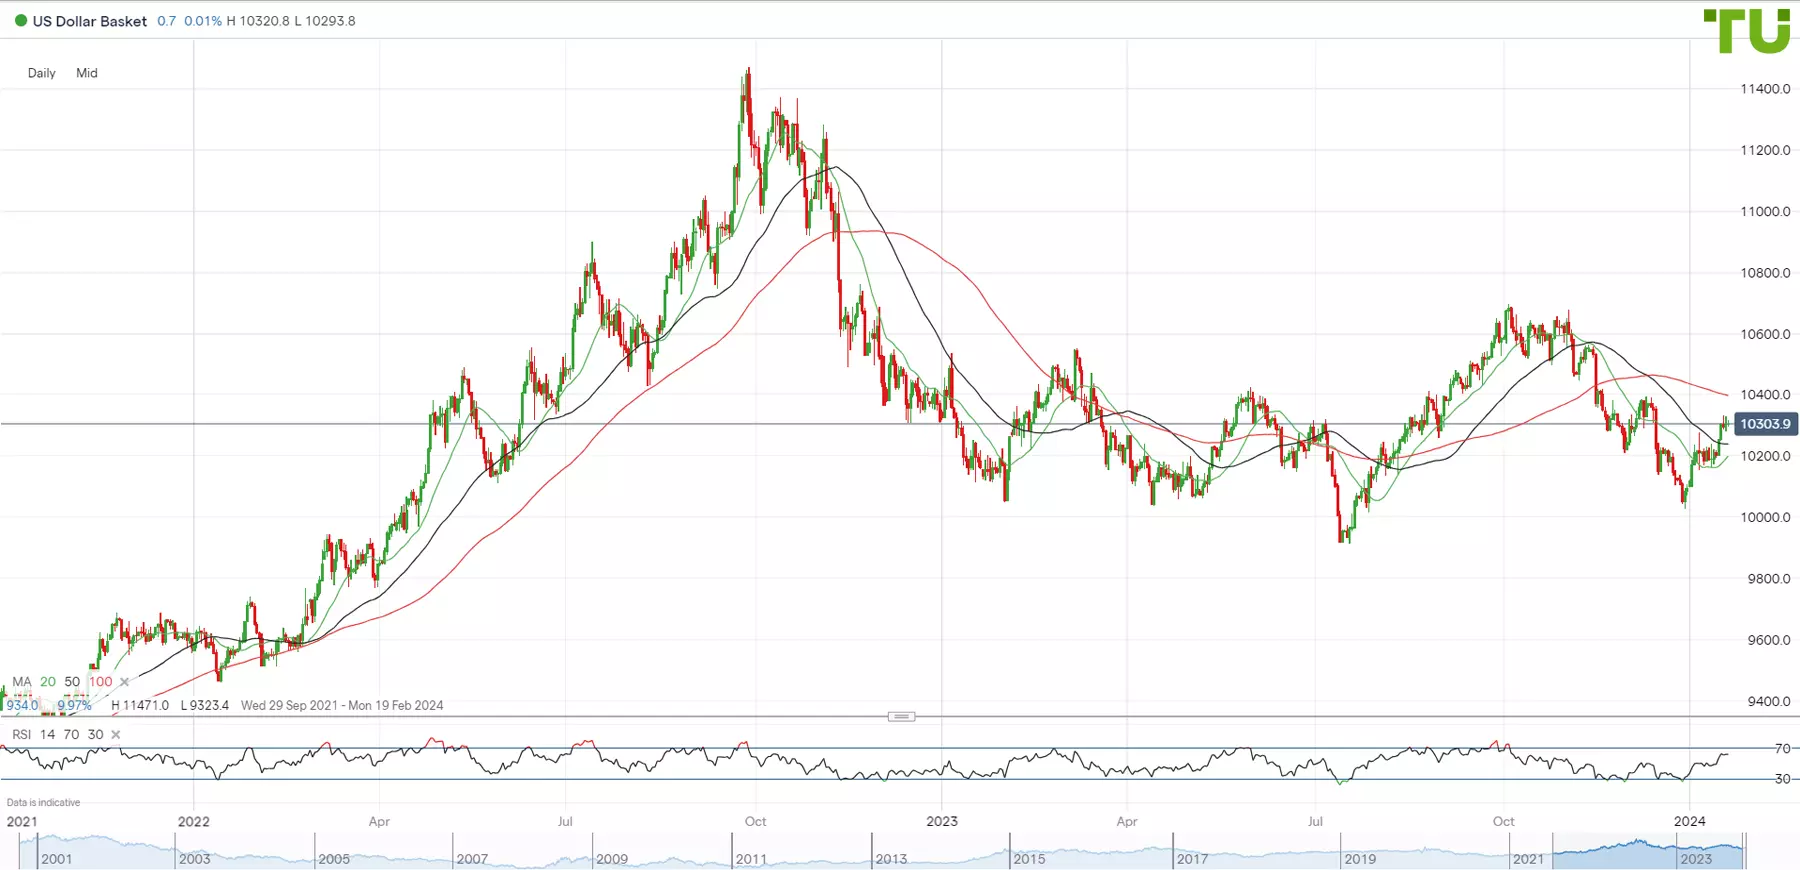 USD INDEX consolidates after growth